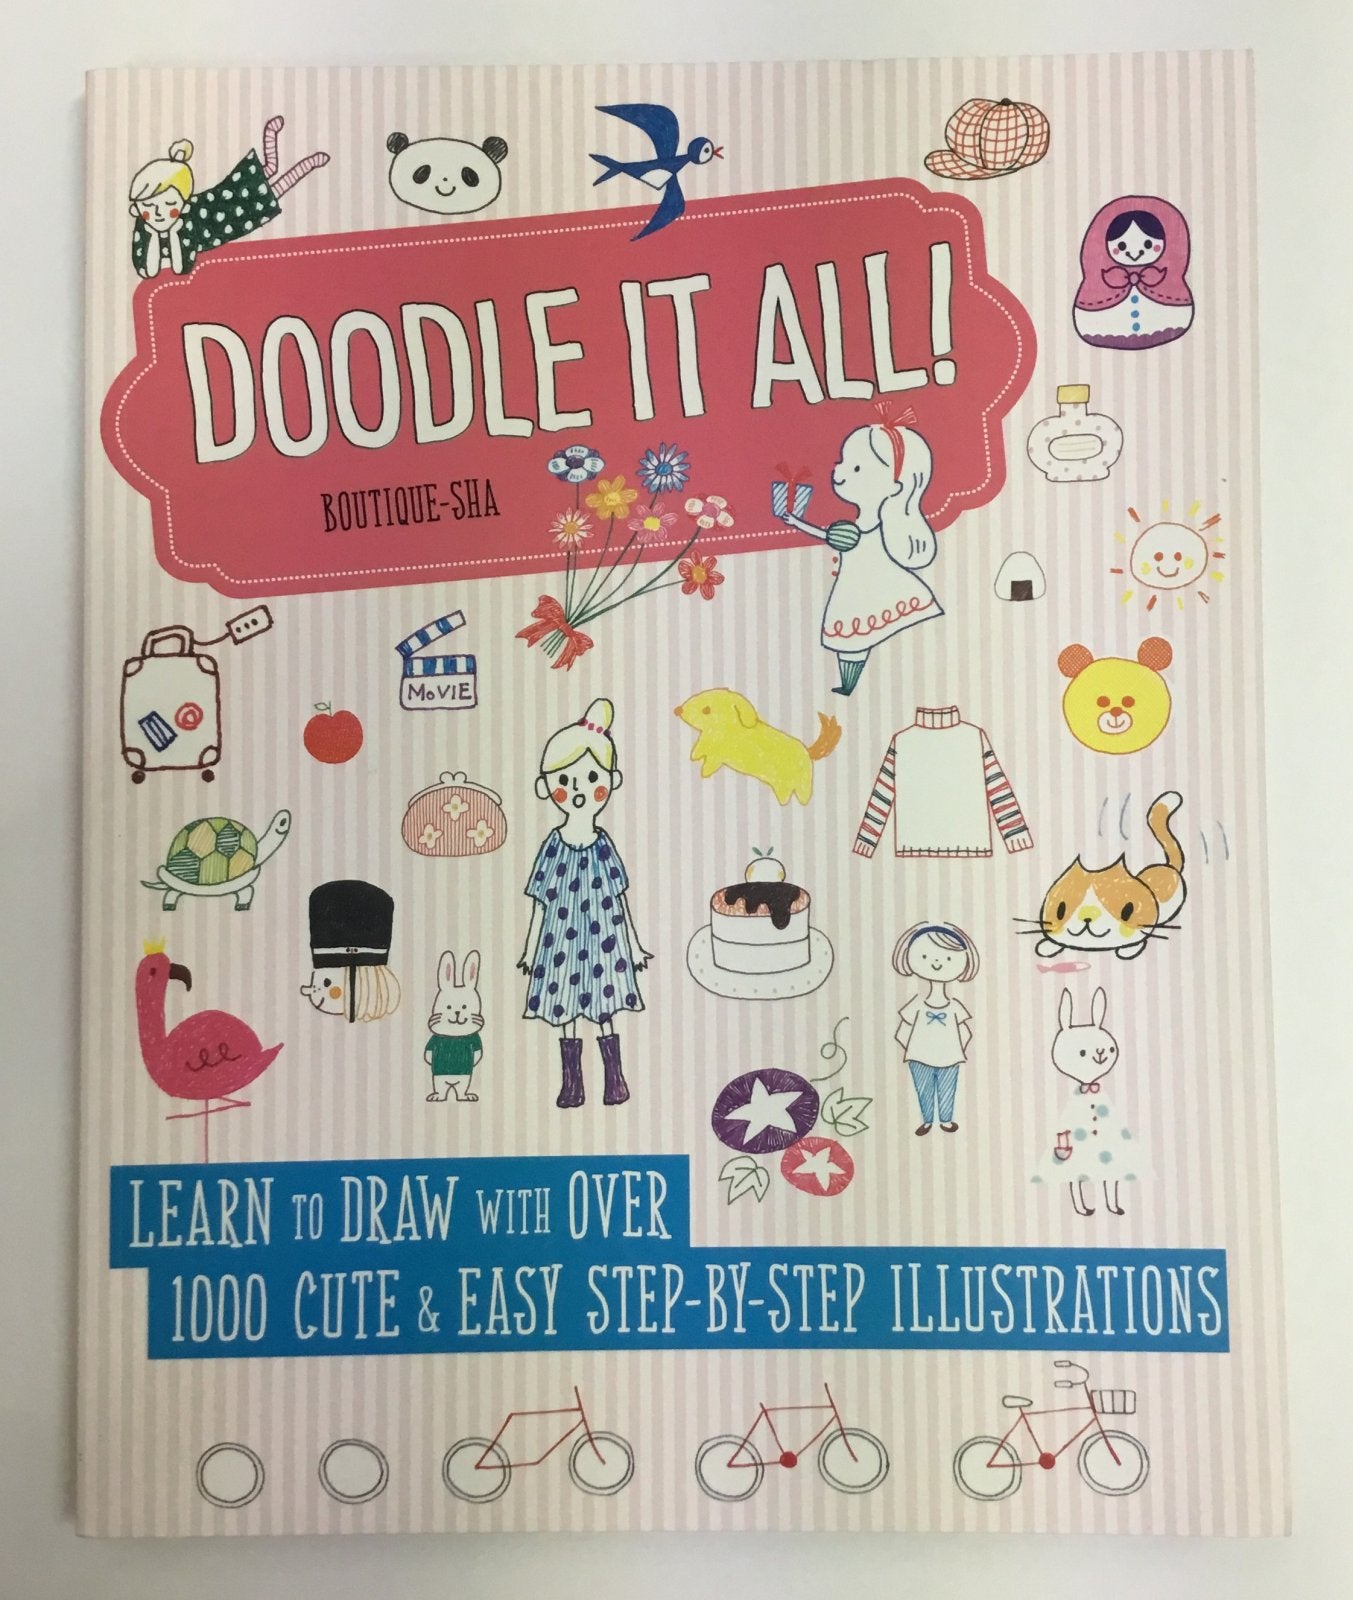 Doodle It All